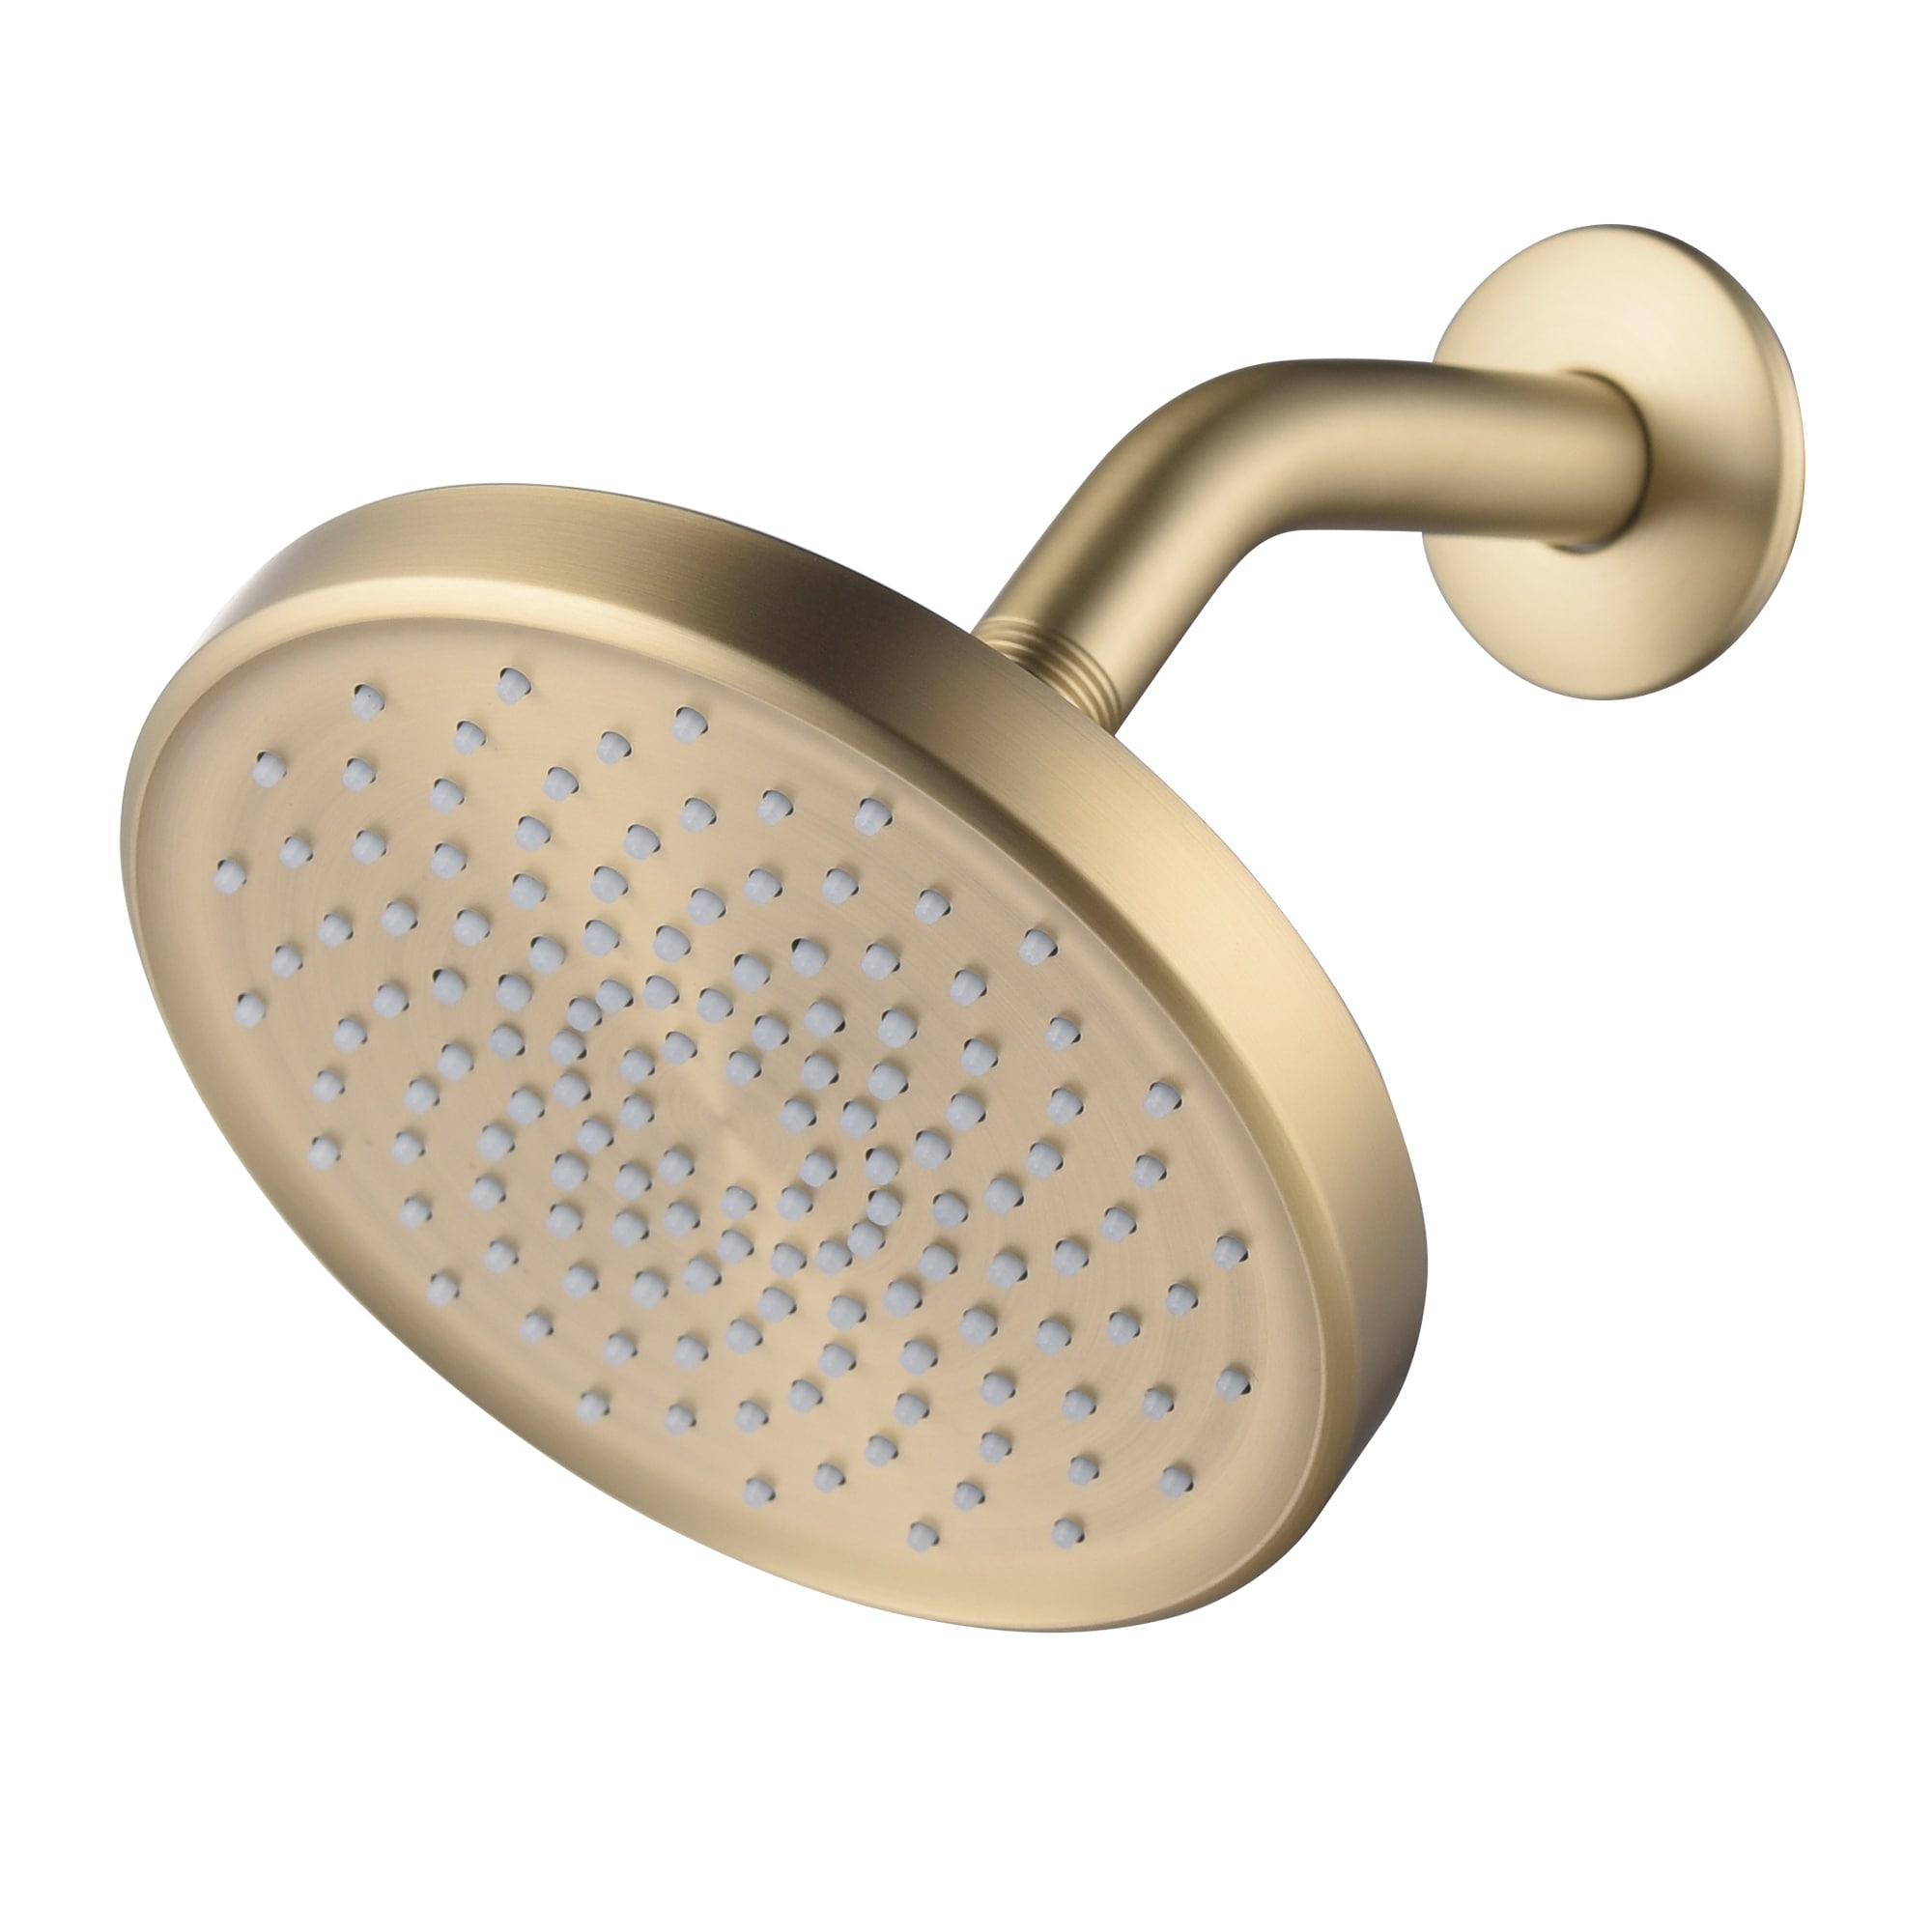 Nebia Corre Four-Function Fixed Shower Head